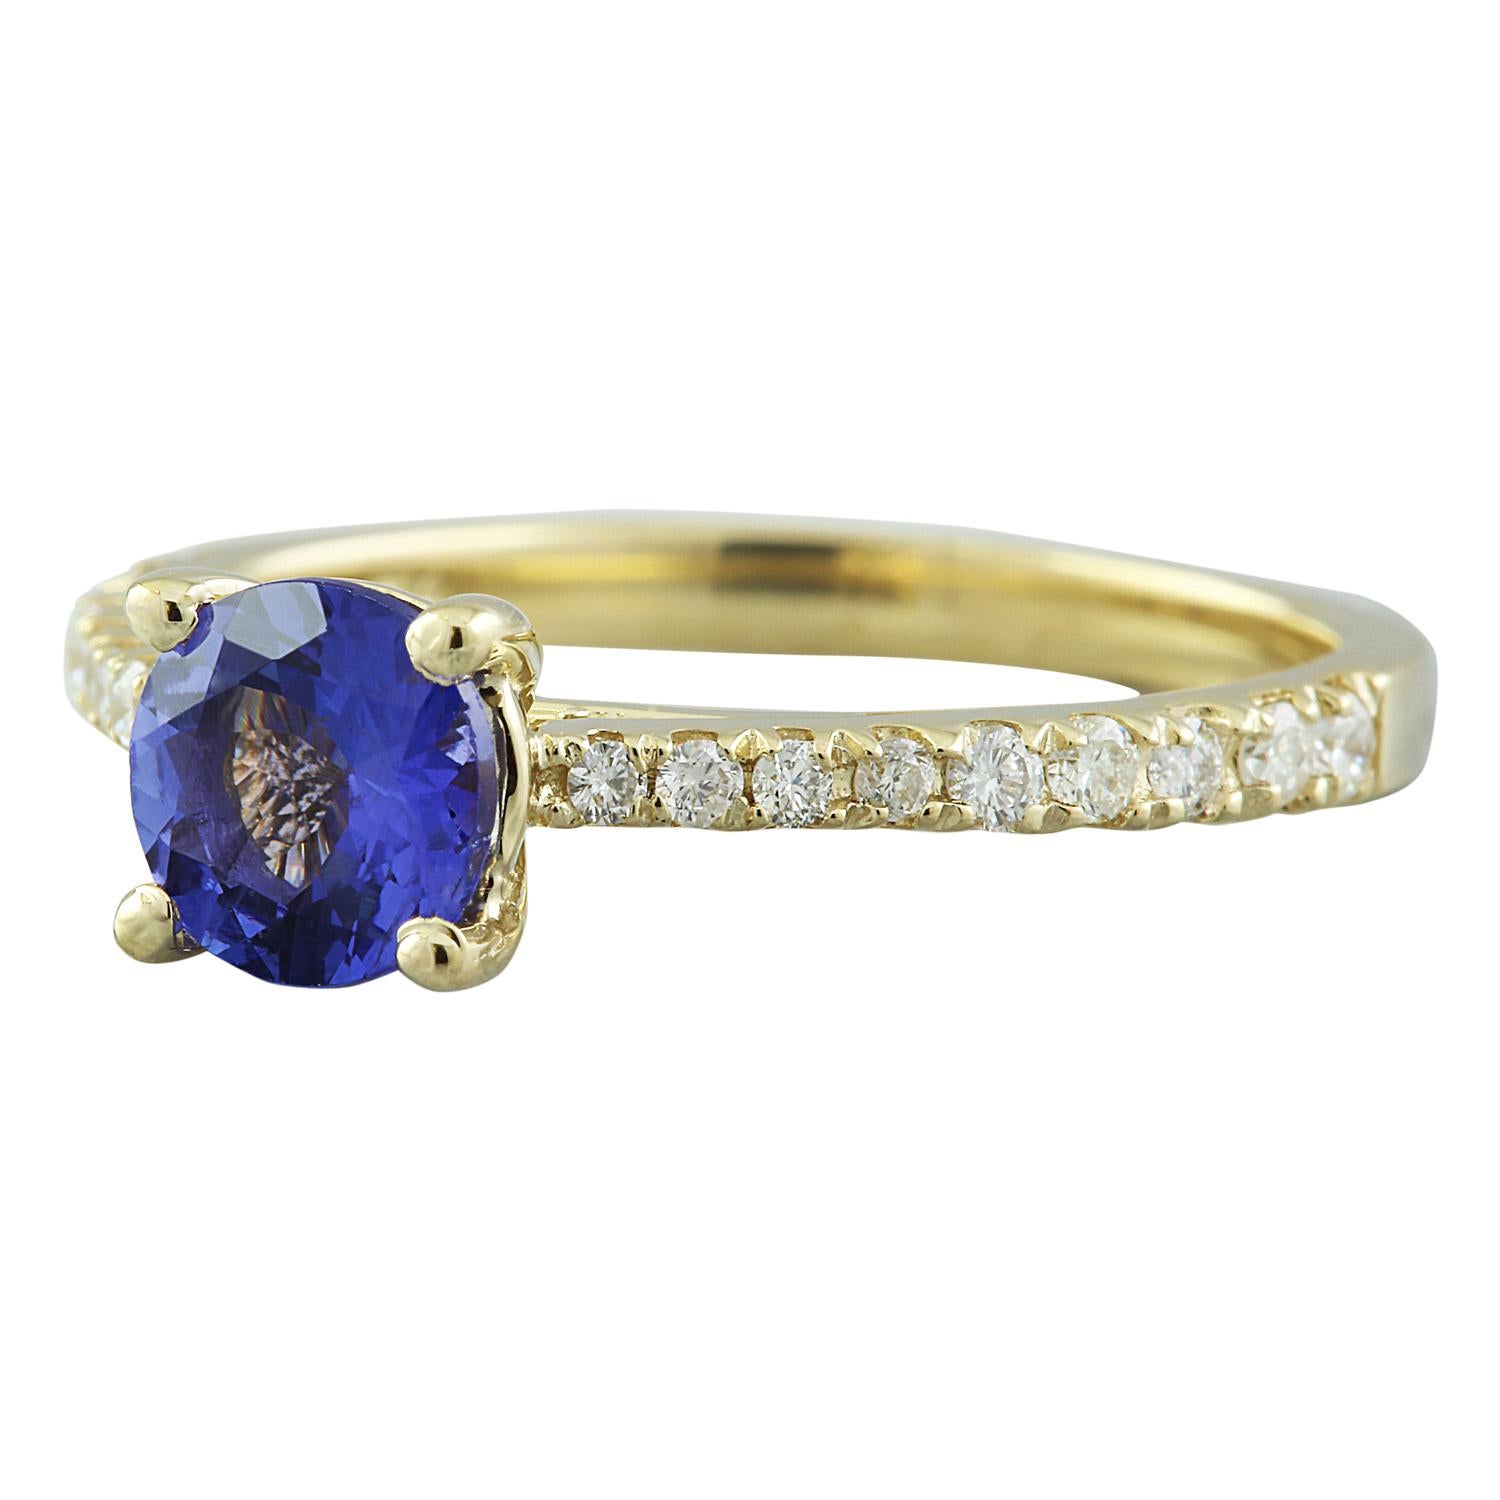 1.28 Carat Natural Tanzanite 14 Karat Solid Yellow Gold Diamond Ring In New Condition For Sale In Los Angeles, CA